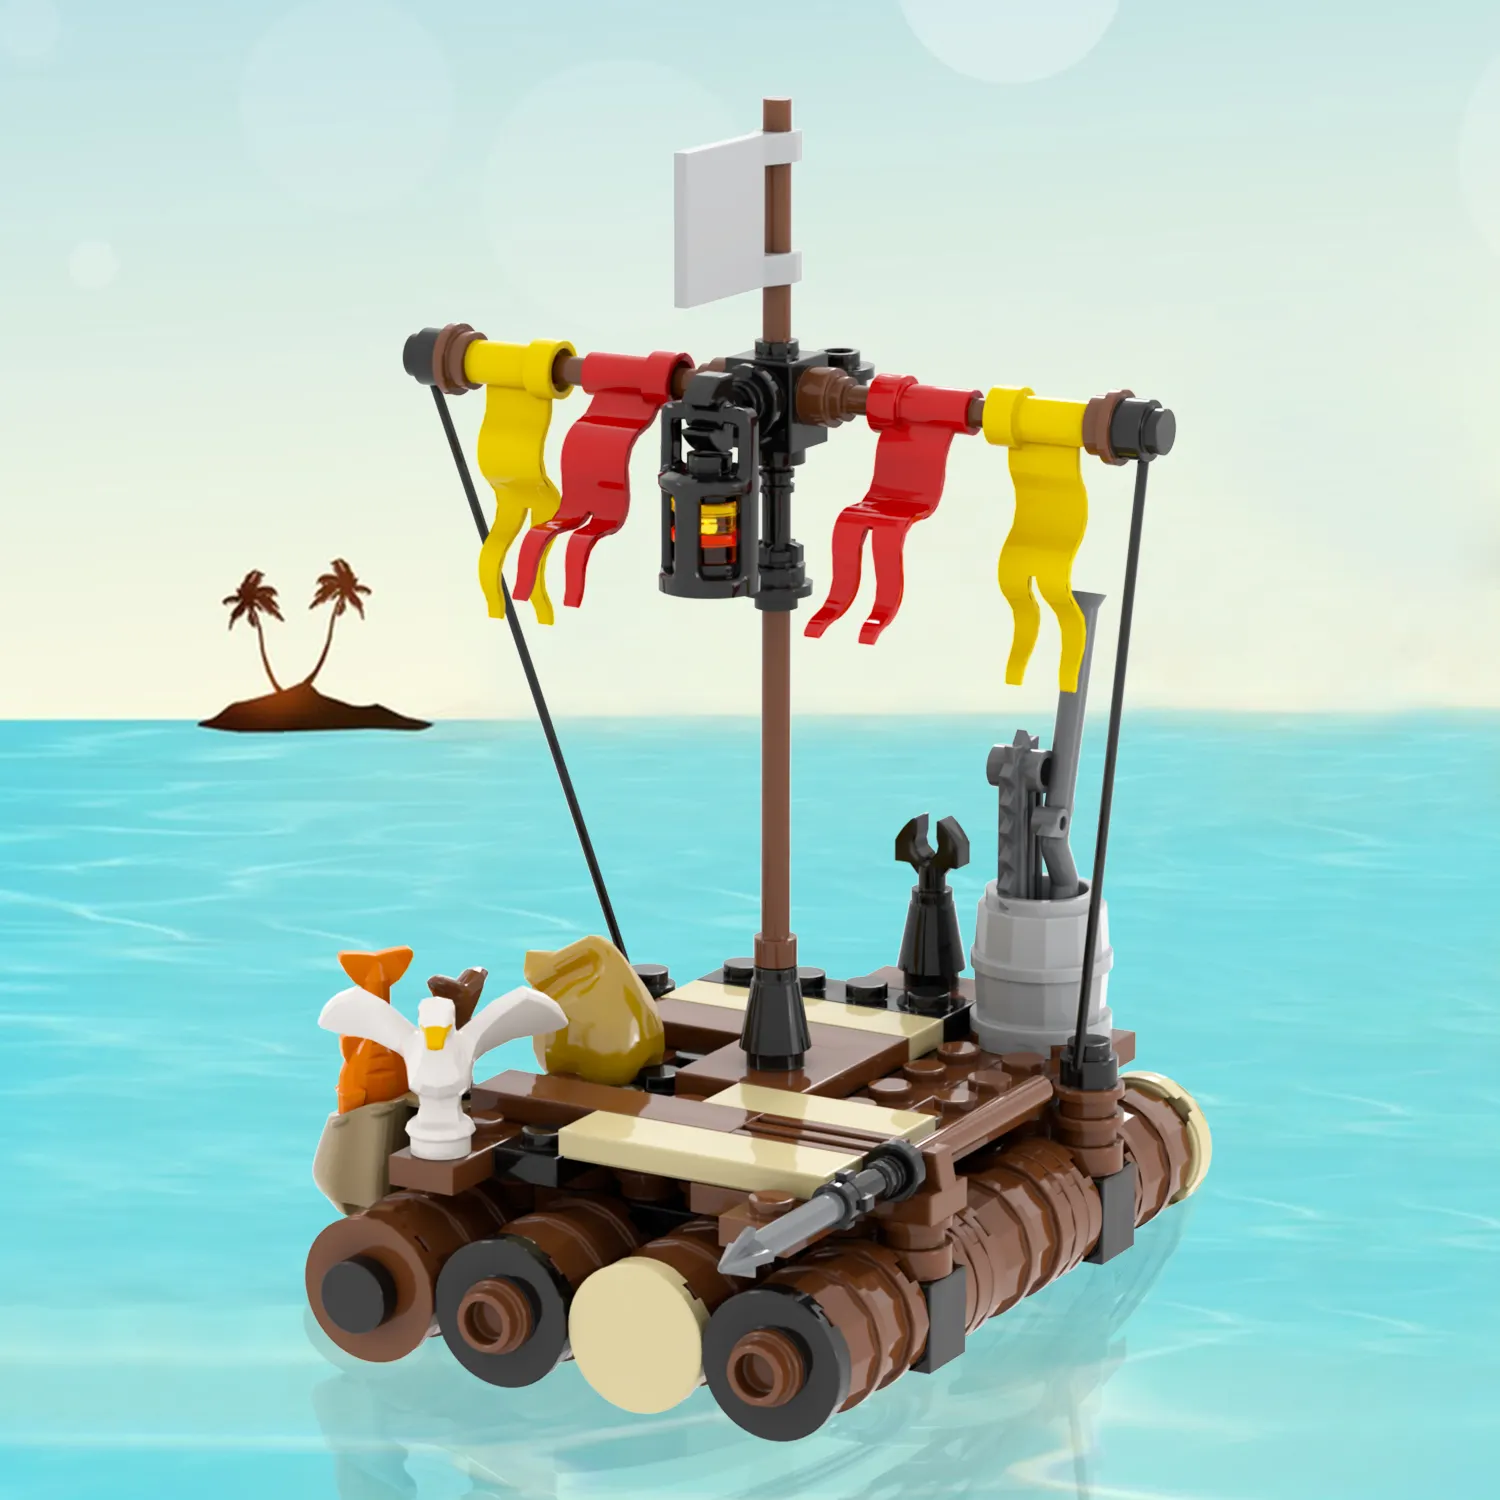 MOC5055 City Movie Middle Ages Desert Island Escape Raft Pirate Lifeboat Watercraft Action Plastic Building Blocks Toys For Kids